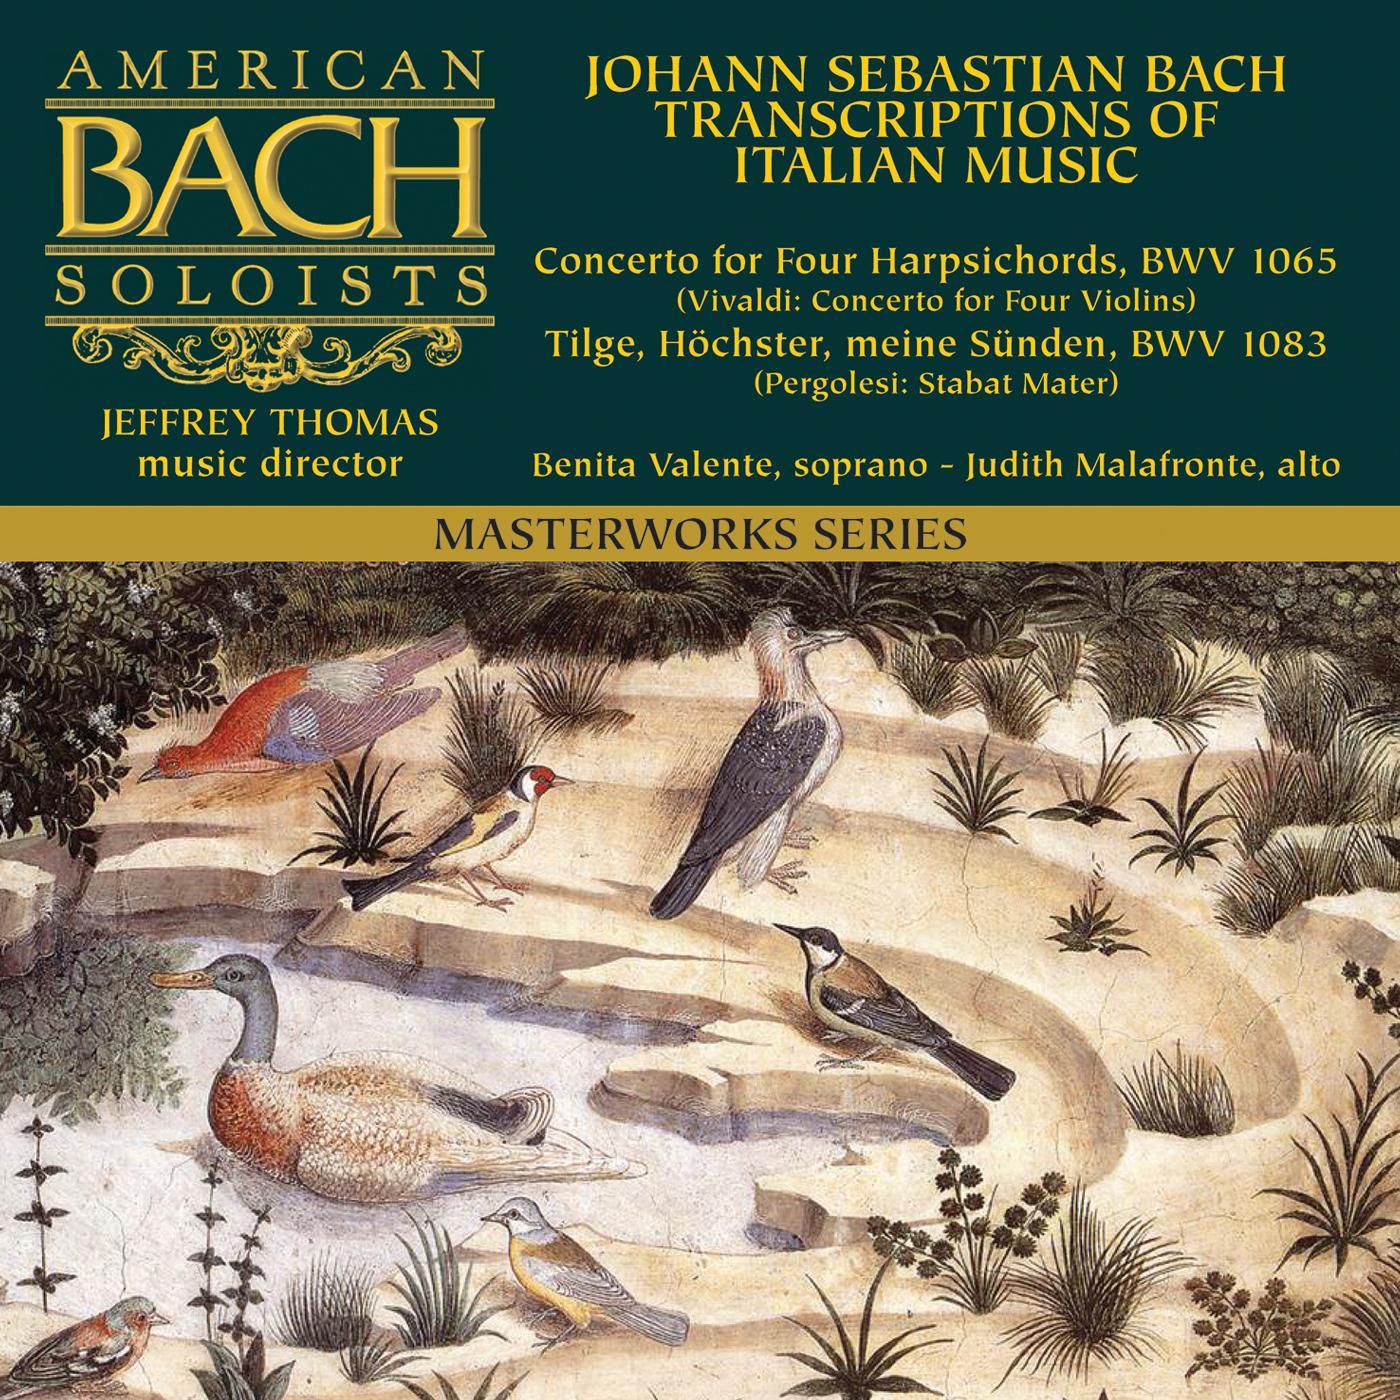 Concerto in A Minor for Four Harpsichords, BWV 1065: II. Largo